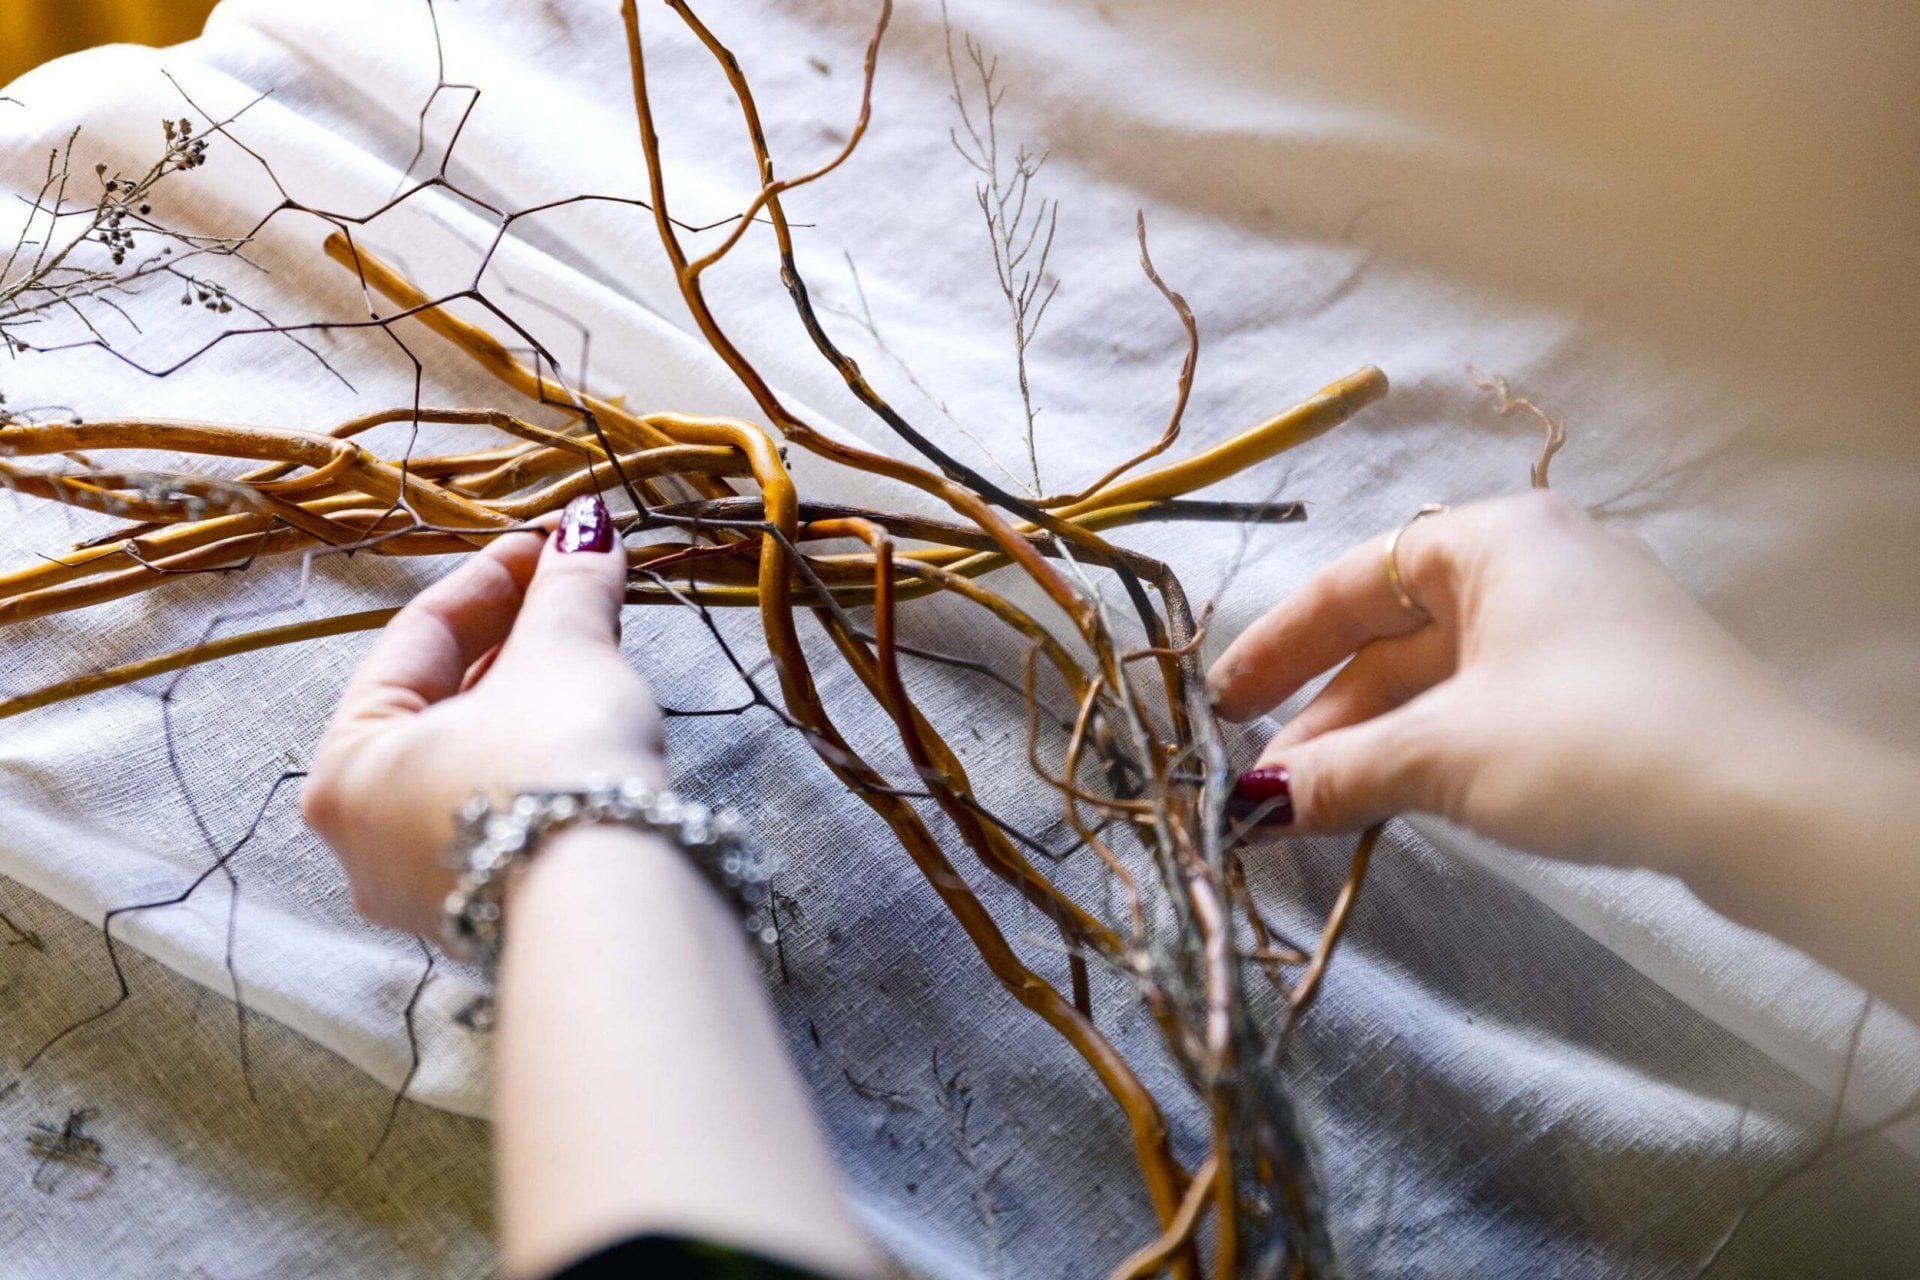 Flower stems being inserted into a wreath made out of willow stems